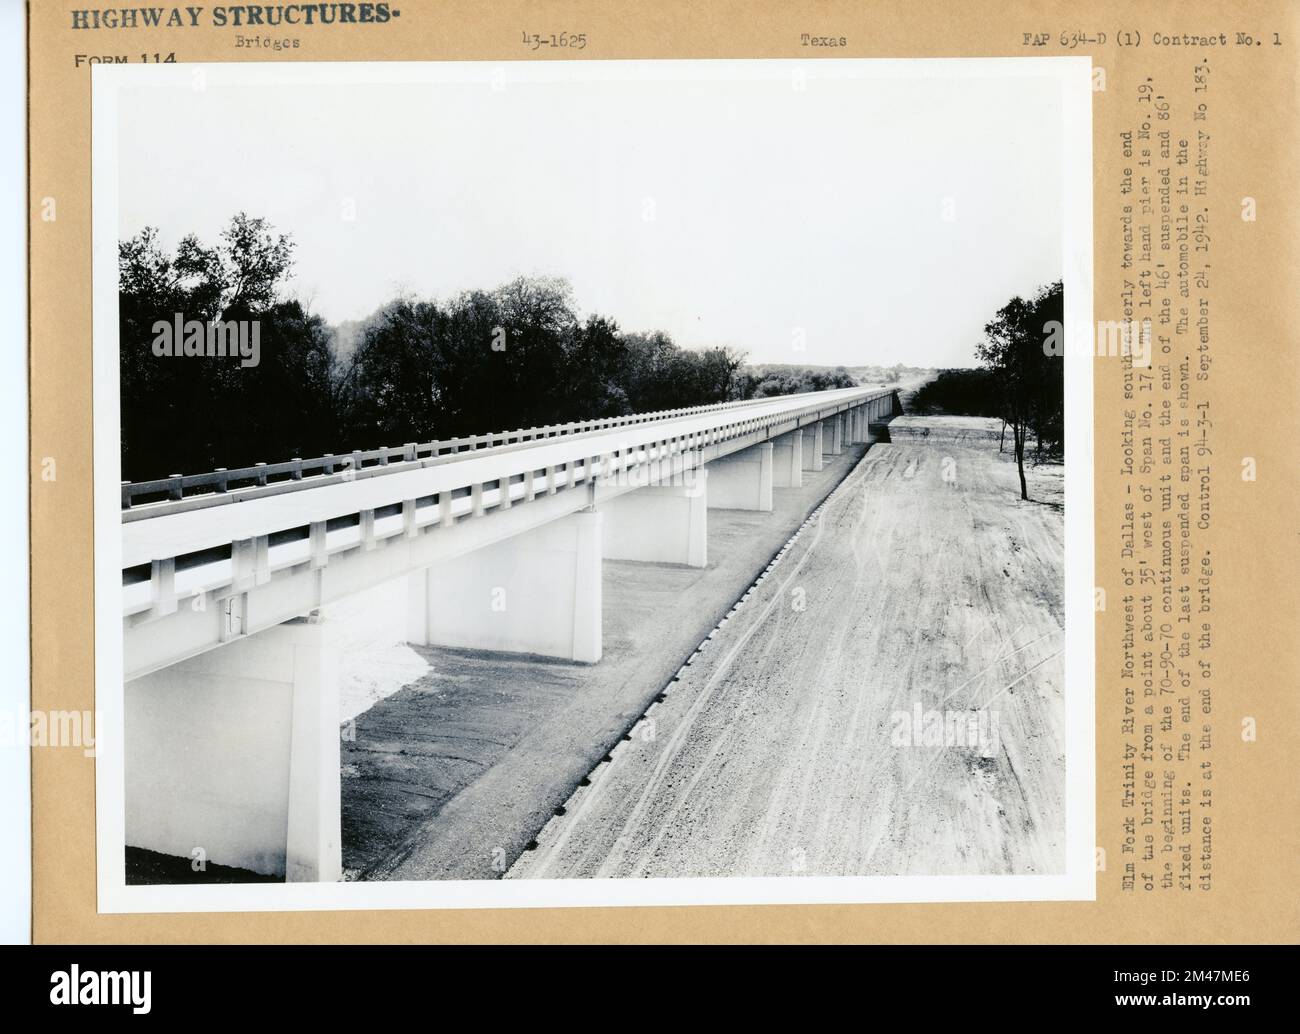 Highway 183 Control bridge. Original caption: Elm Fork Trinity River Northwest of Dallas - Looking southwesterly towards the end of the bridge from a point about 35' west of Span No. 17. The left hand pier is No. 19, the beginning of the 70-90-70 continuous unit and the end of the 46' suspended and 86' fixed units. The end of the last suspended span is shown. The automobile in the distance is at the end of the bridge. Control 94-3-1 September 24, 1942. Highway No 183. FAP 634-D(1). State: Texas. Stock Photo